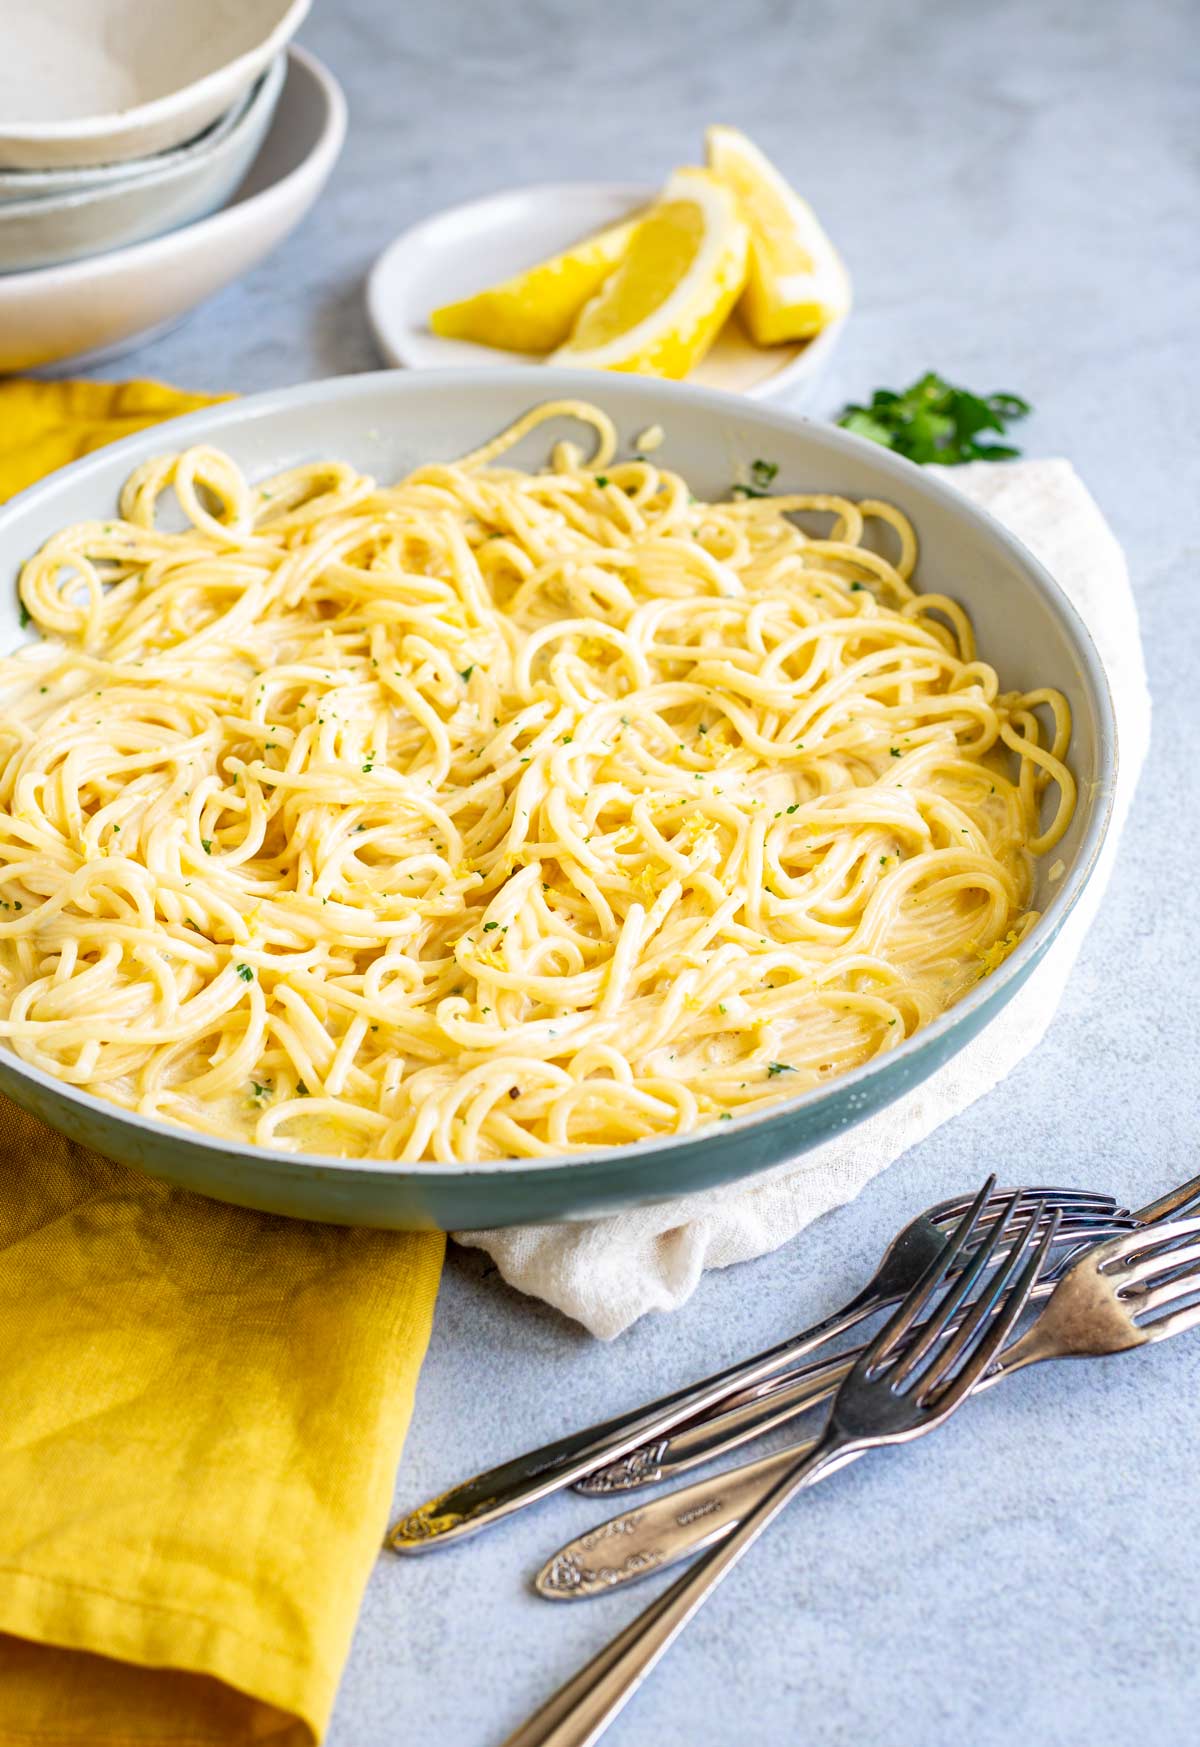 frying pan filled with pasta on a stone table with lemon wedges and rustic forks